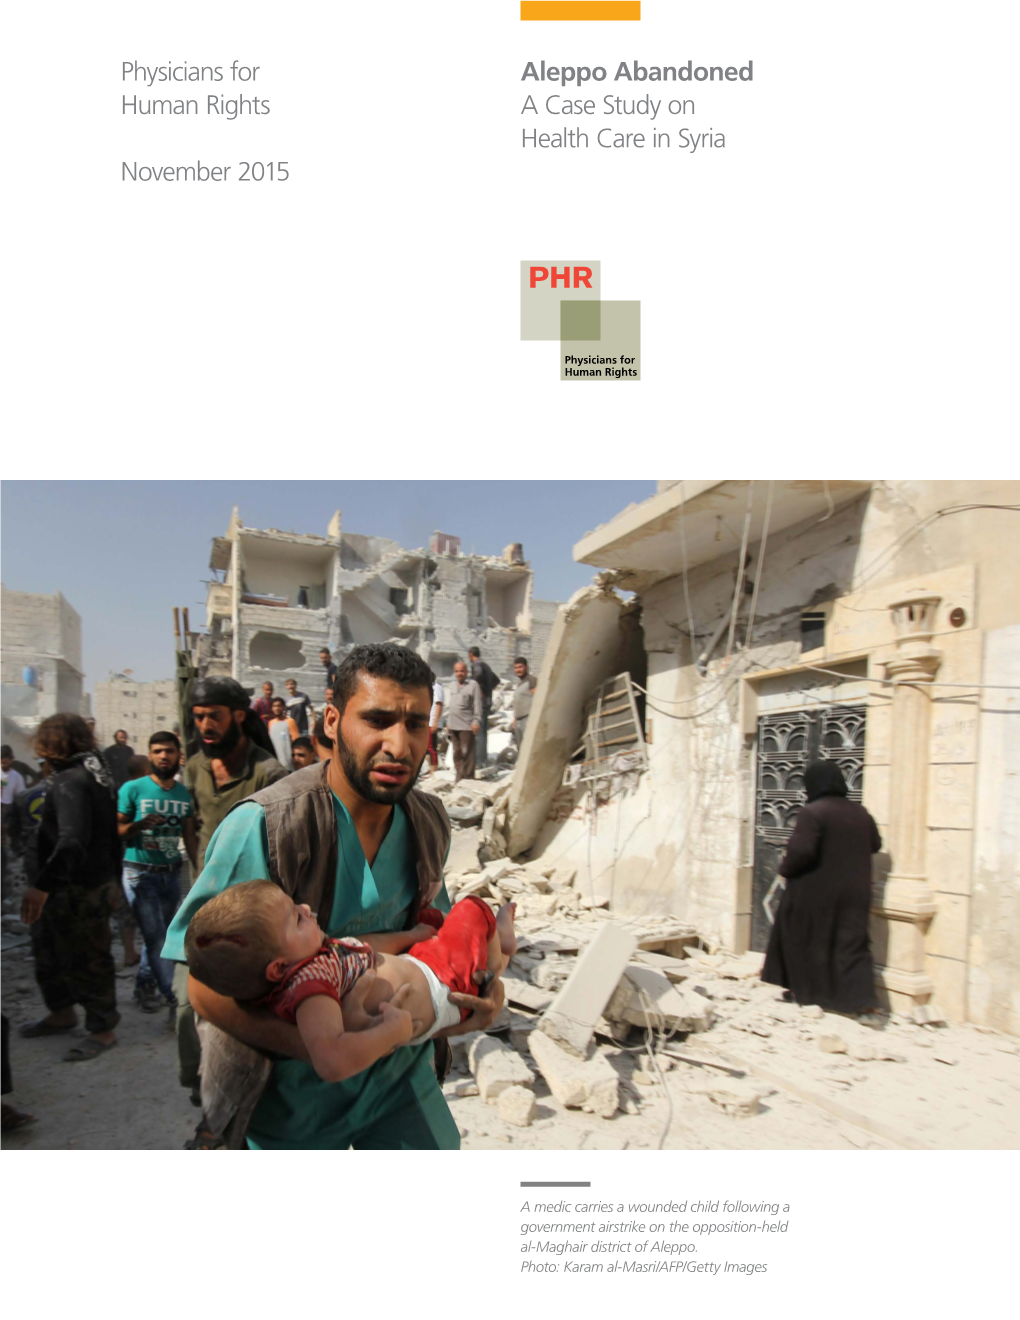 Aleppo Abandoned Human Rights a Case Study on Health Care in Syria November 2015